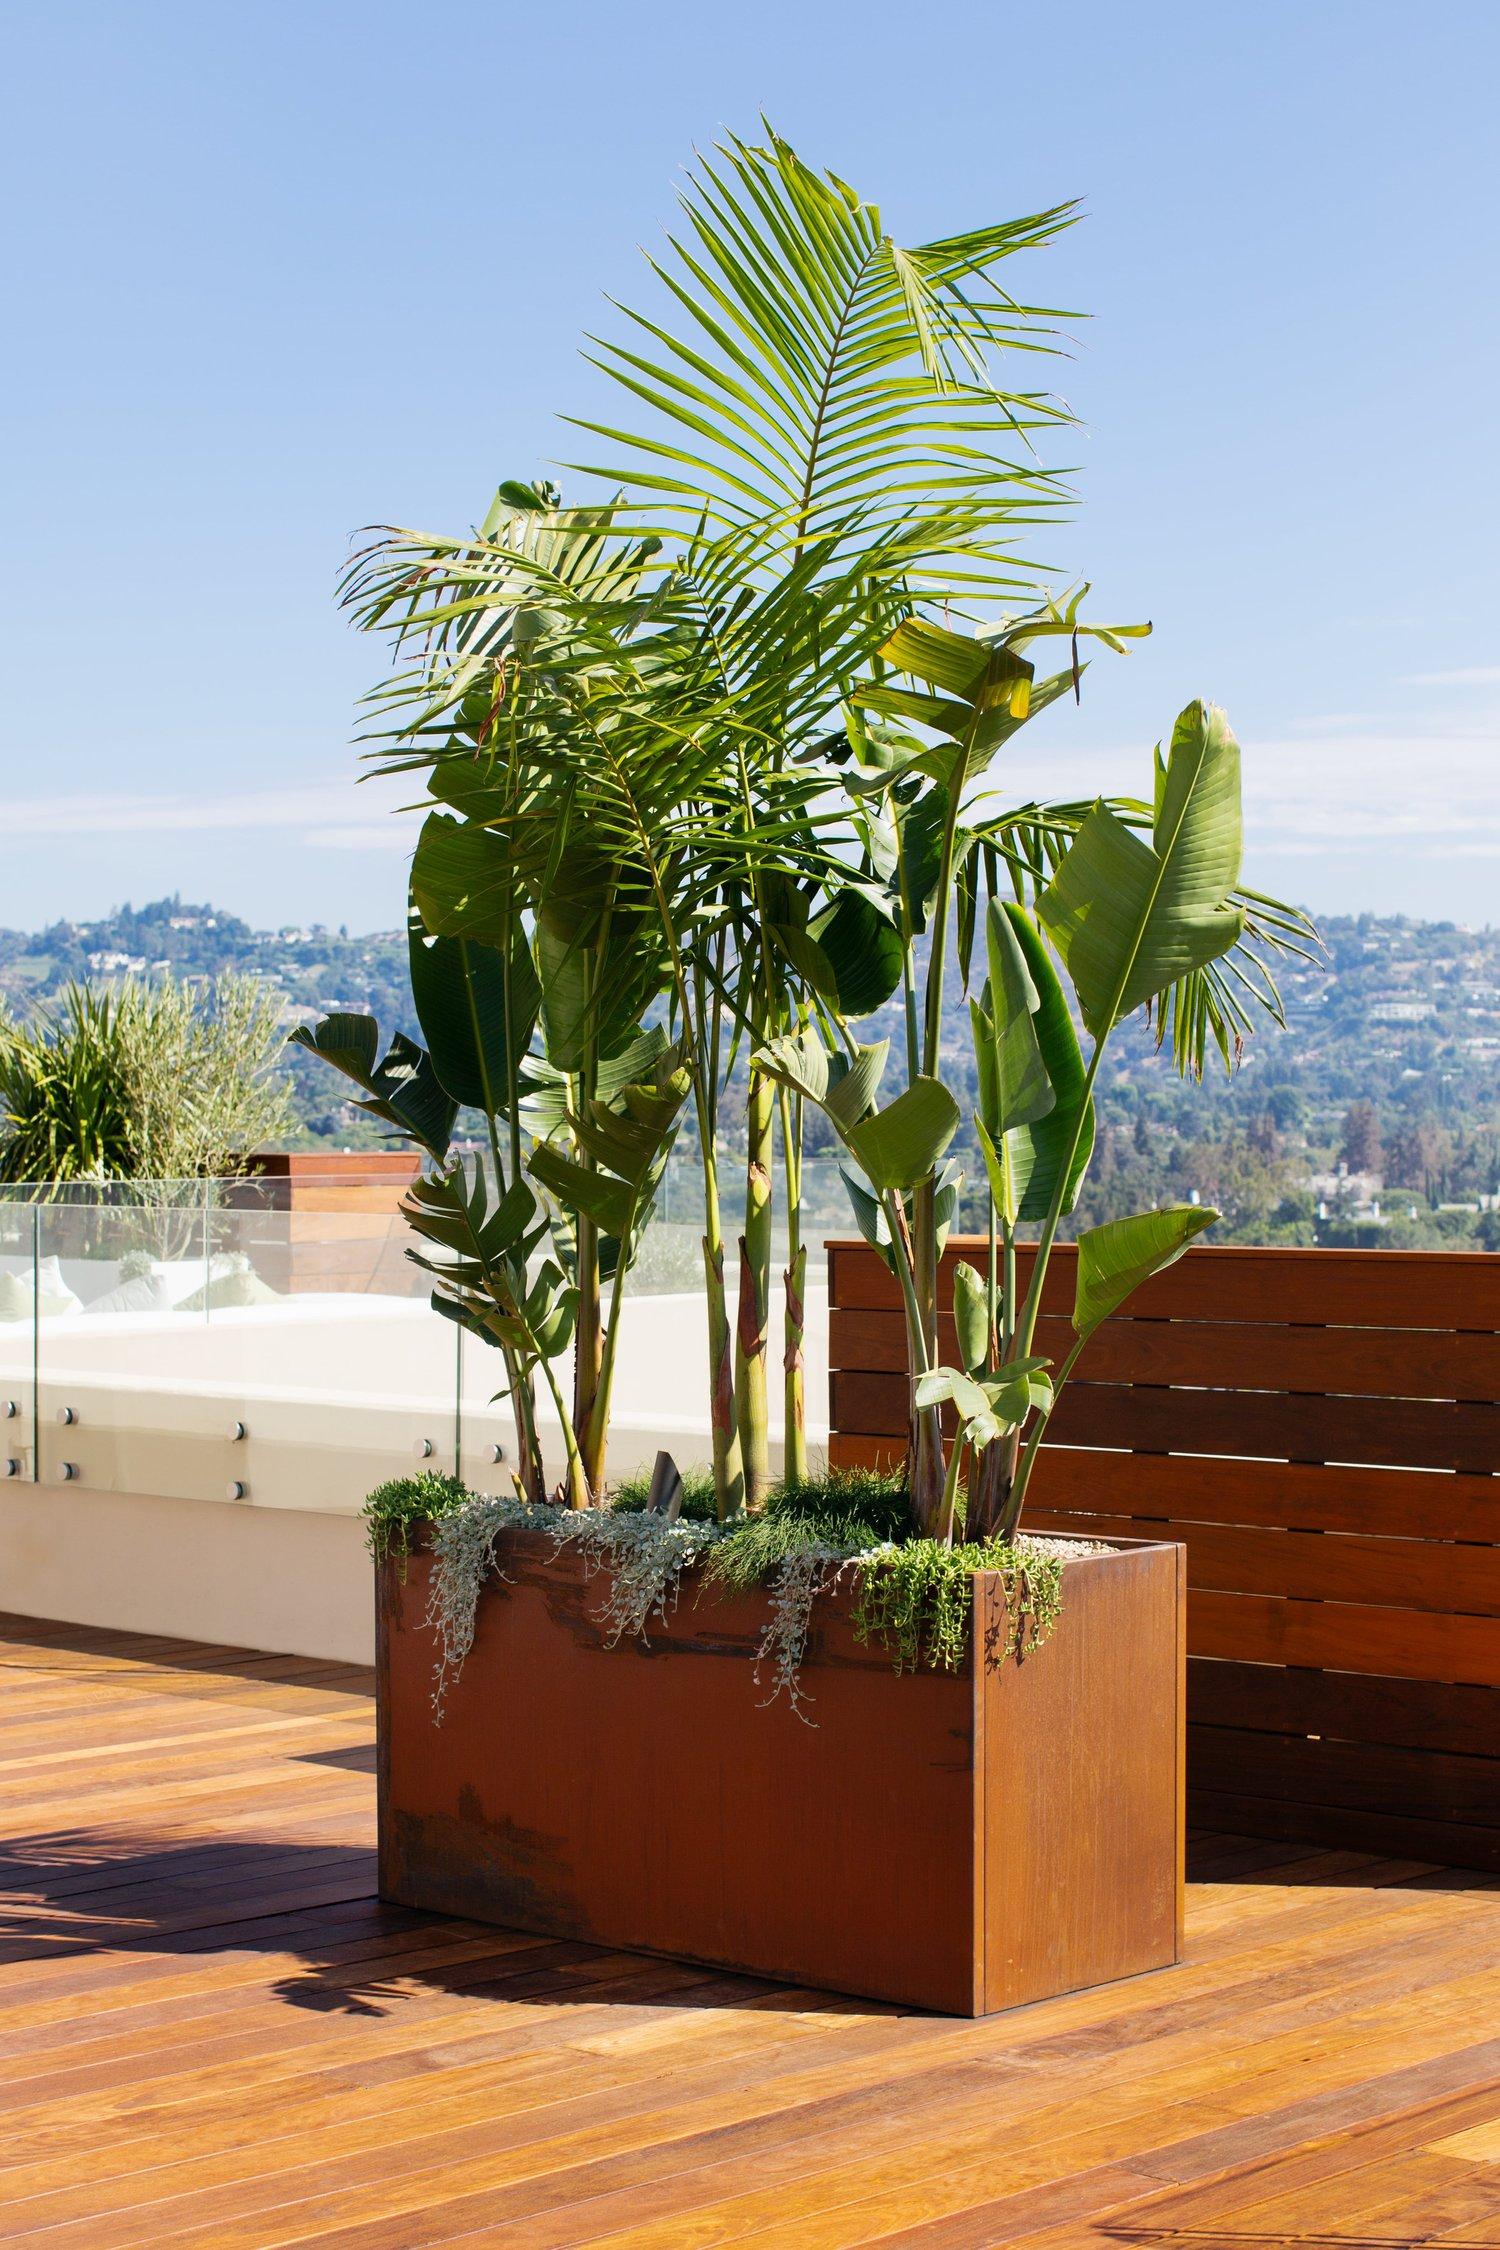 Elevate your outdoor or interior spaces with our custom corten steel edible garden boxes or planters, ideal for residential and commercial settings alike. Crafted with precision and durability, these Corten steel creations offer a timeless appeal